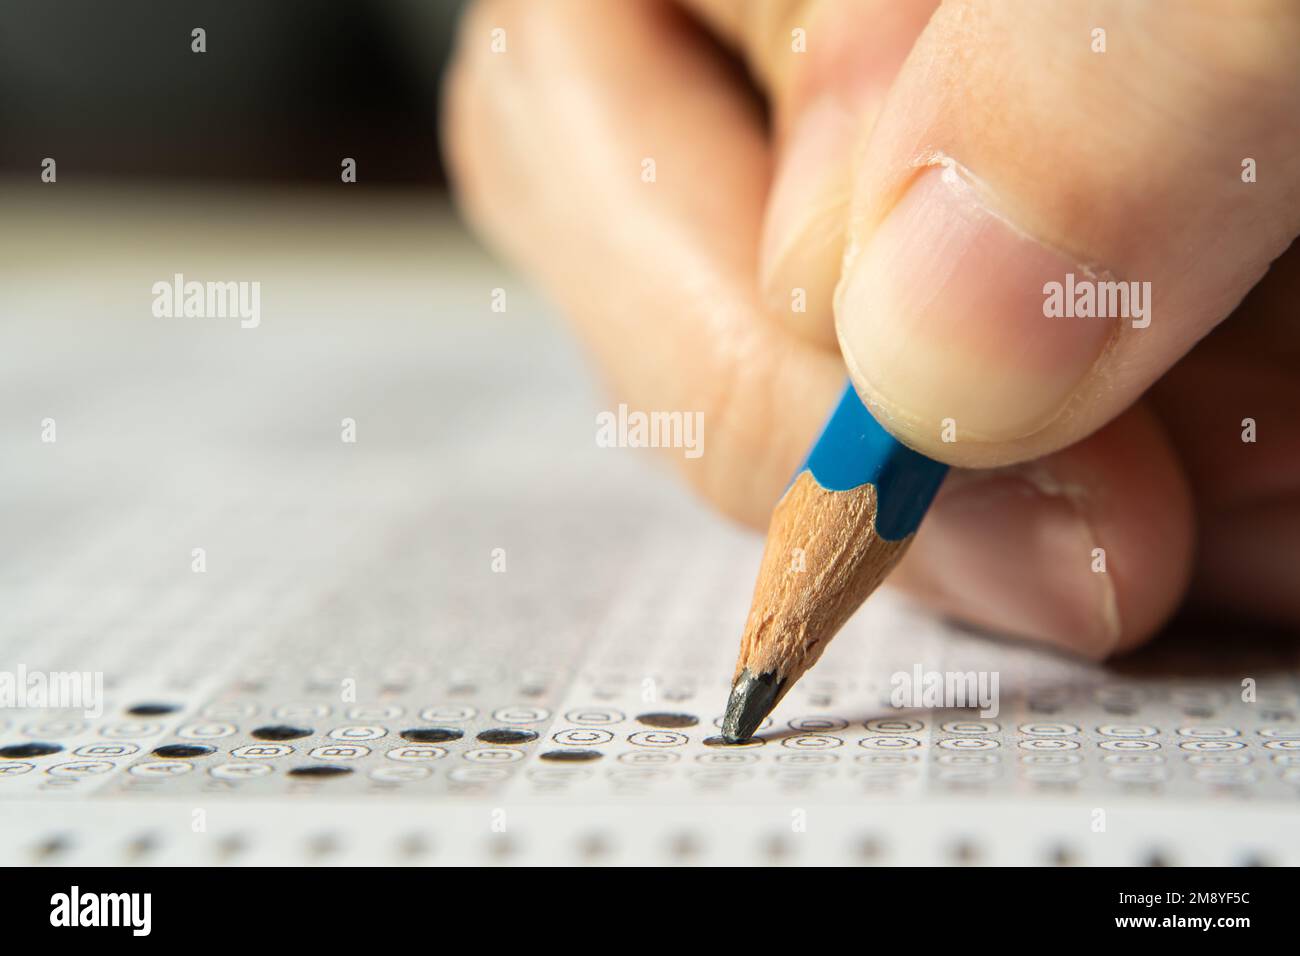 Taking an exam with 2B pencil Stock Photo